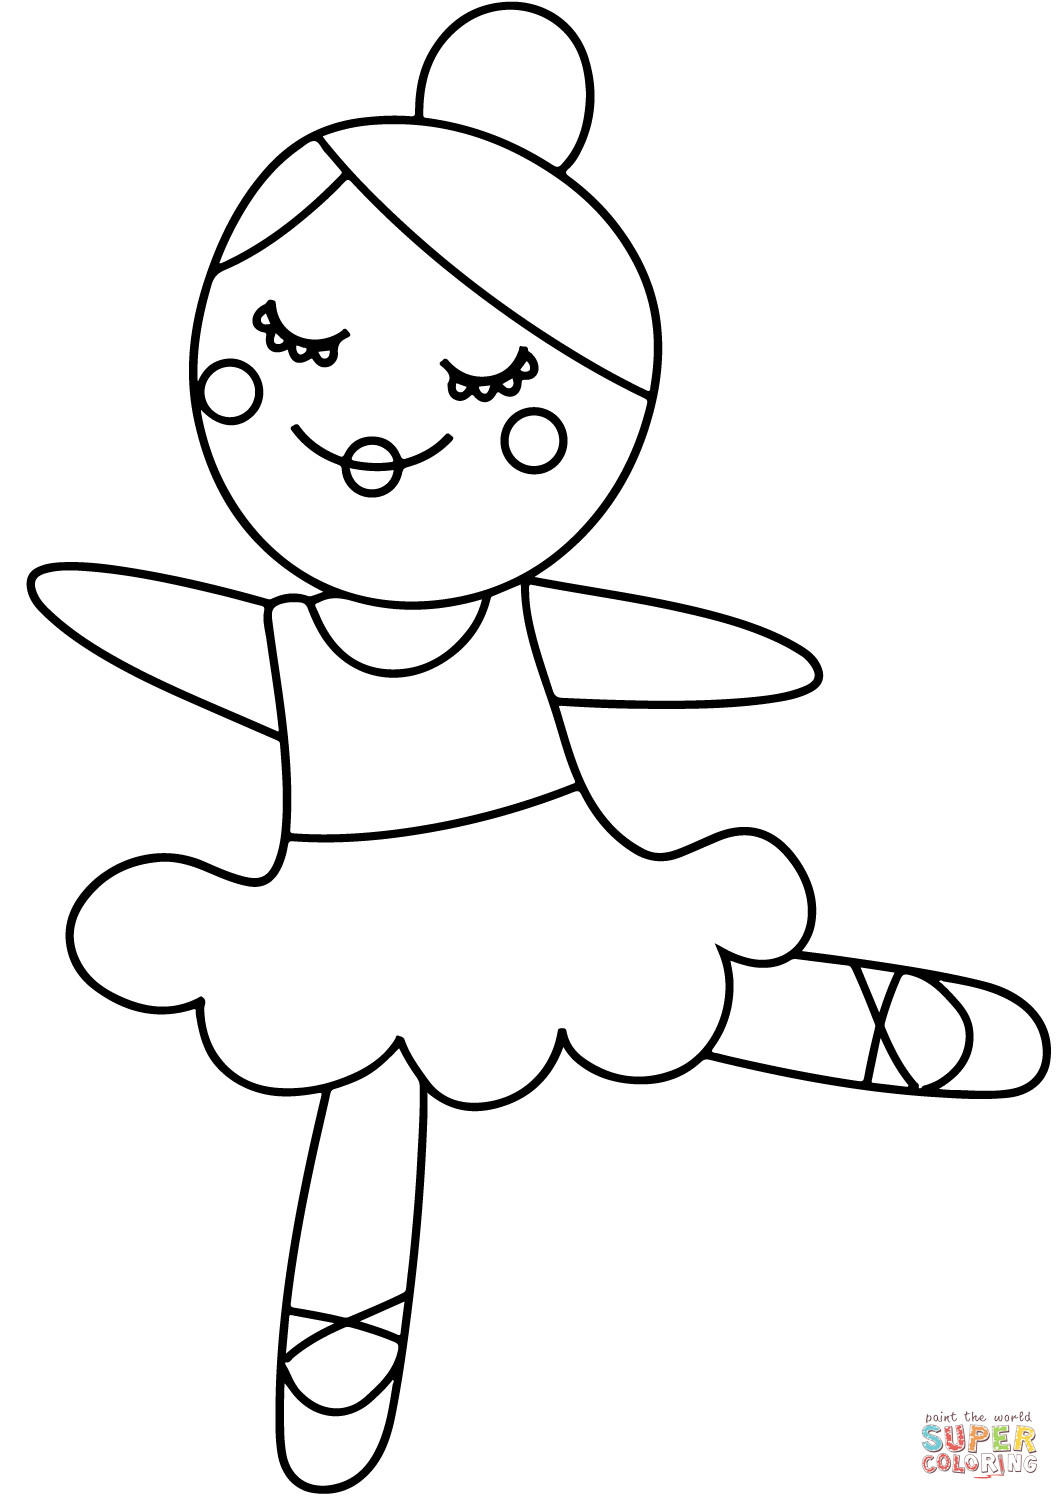 Ballerina Coloring Pages For Girls
 Cartoon Ballerina coloring page